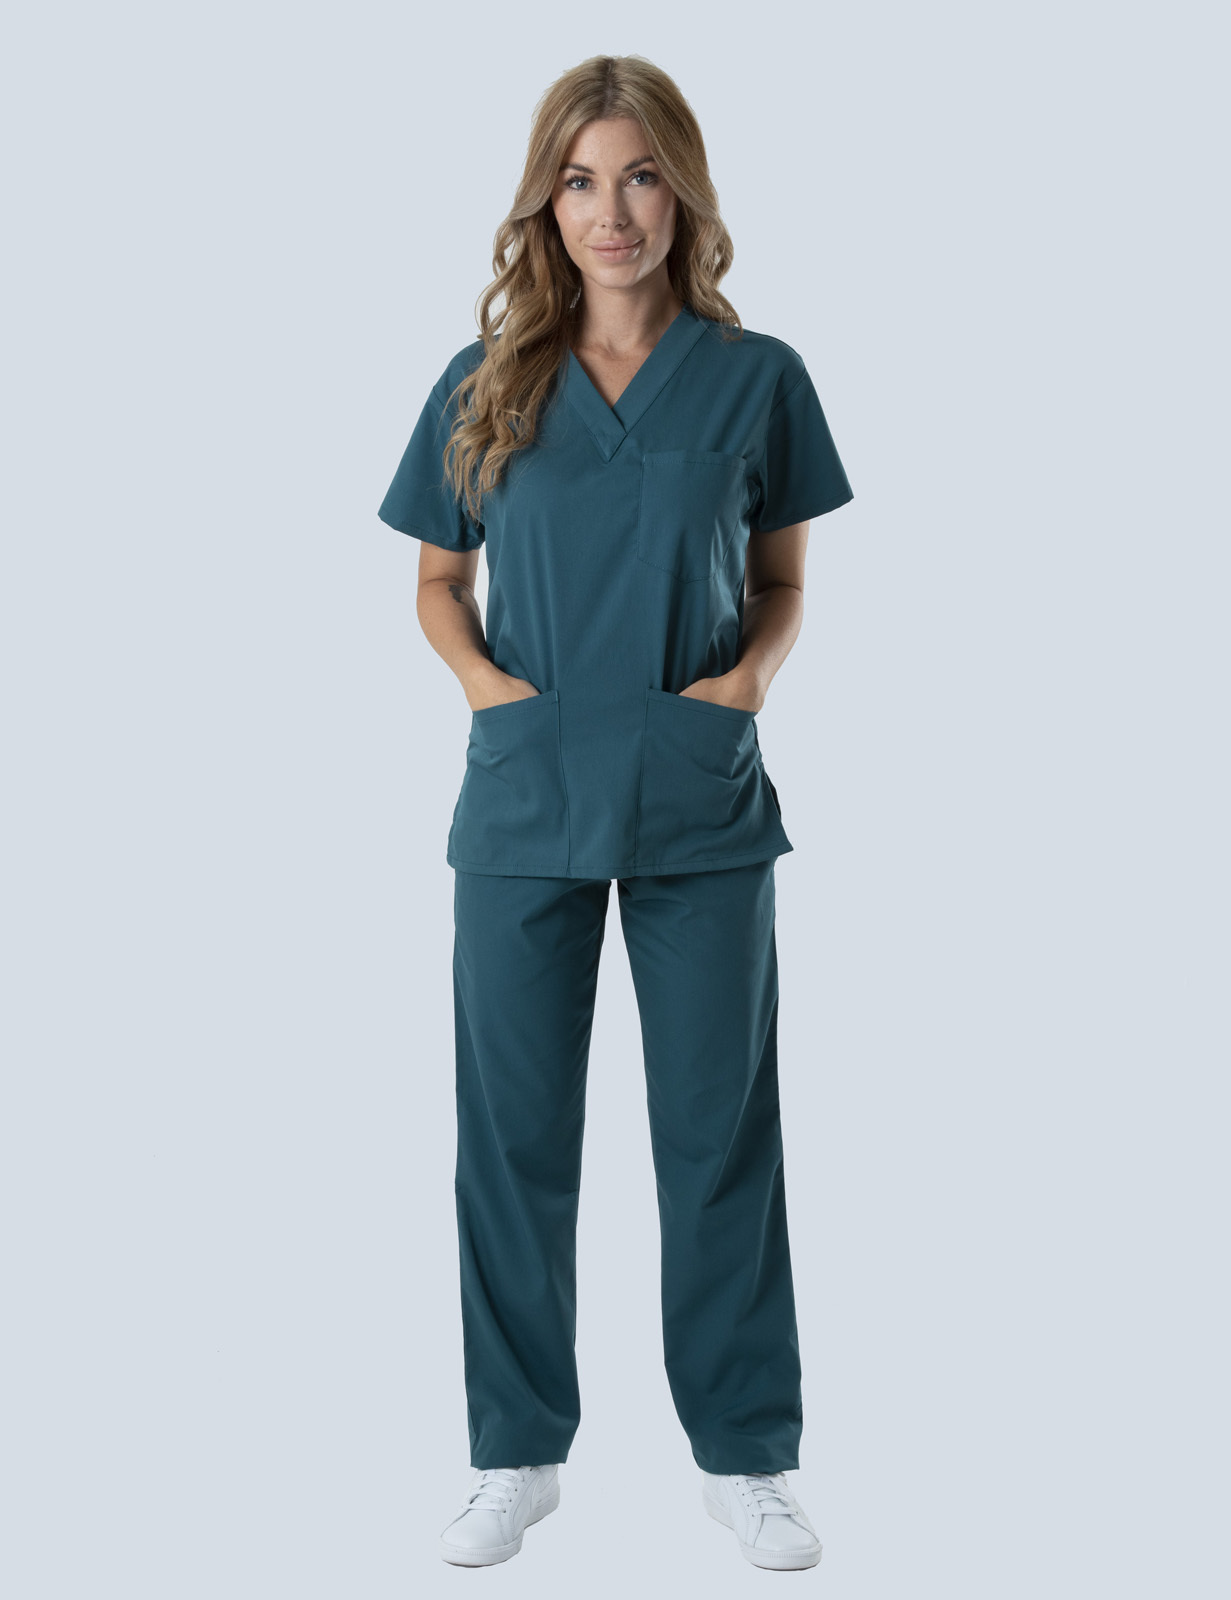 RBWH - Neonatal ICU (Women's Fit Solid Scrub Top and Cargo Pants in Caribbean incl Logos)